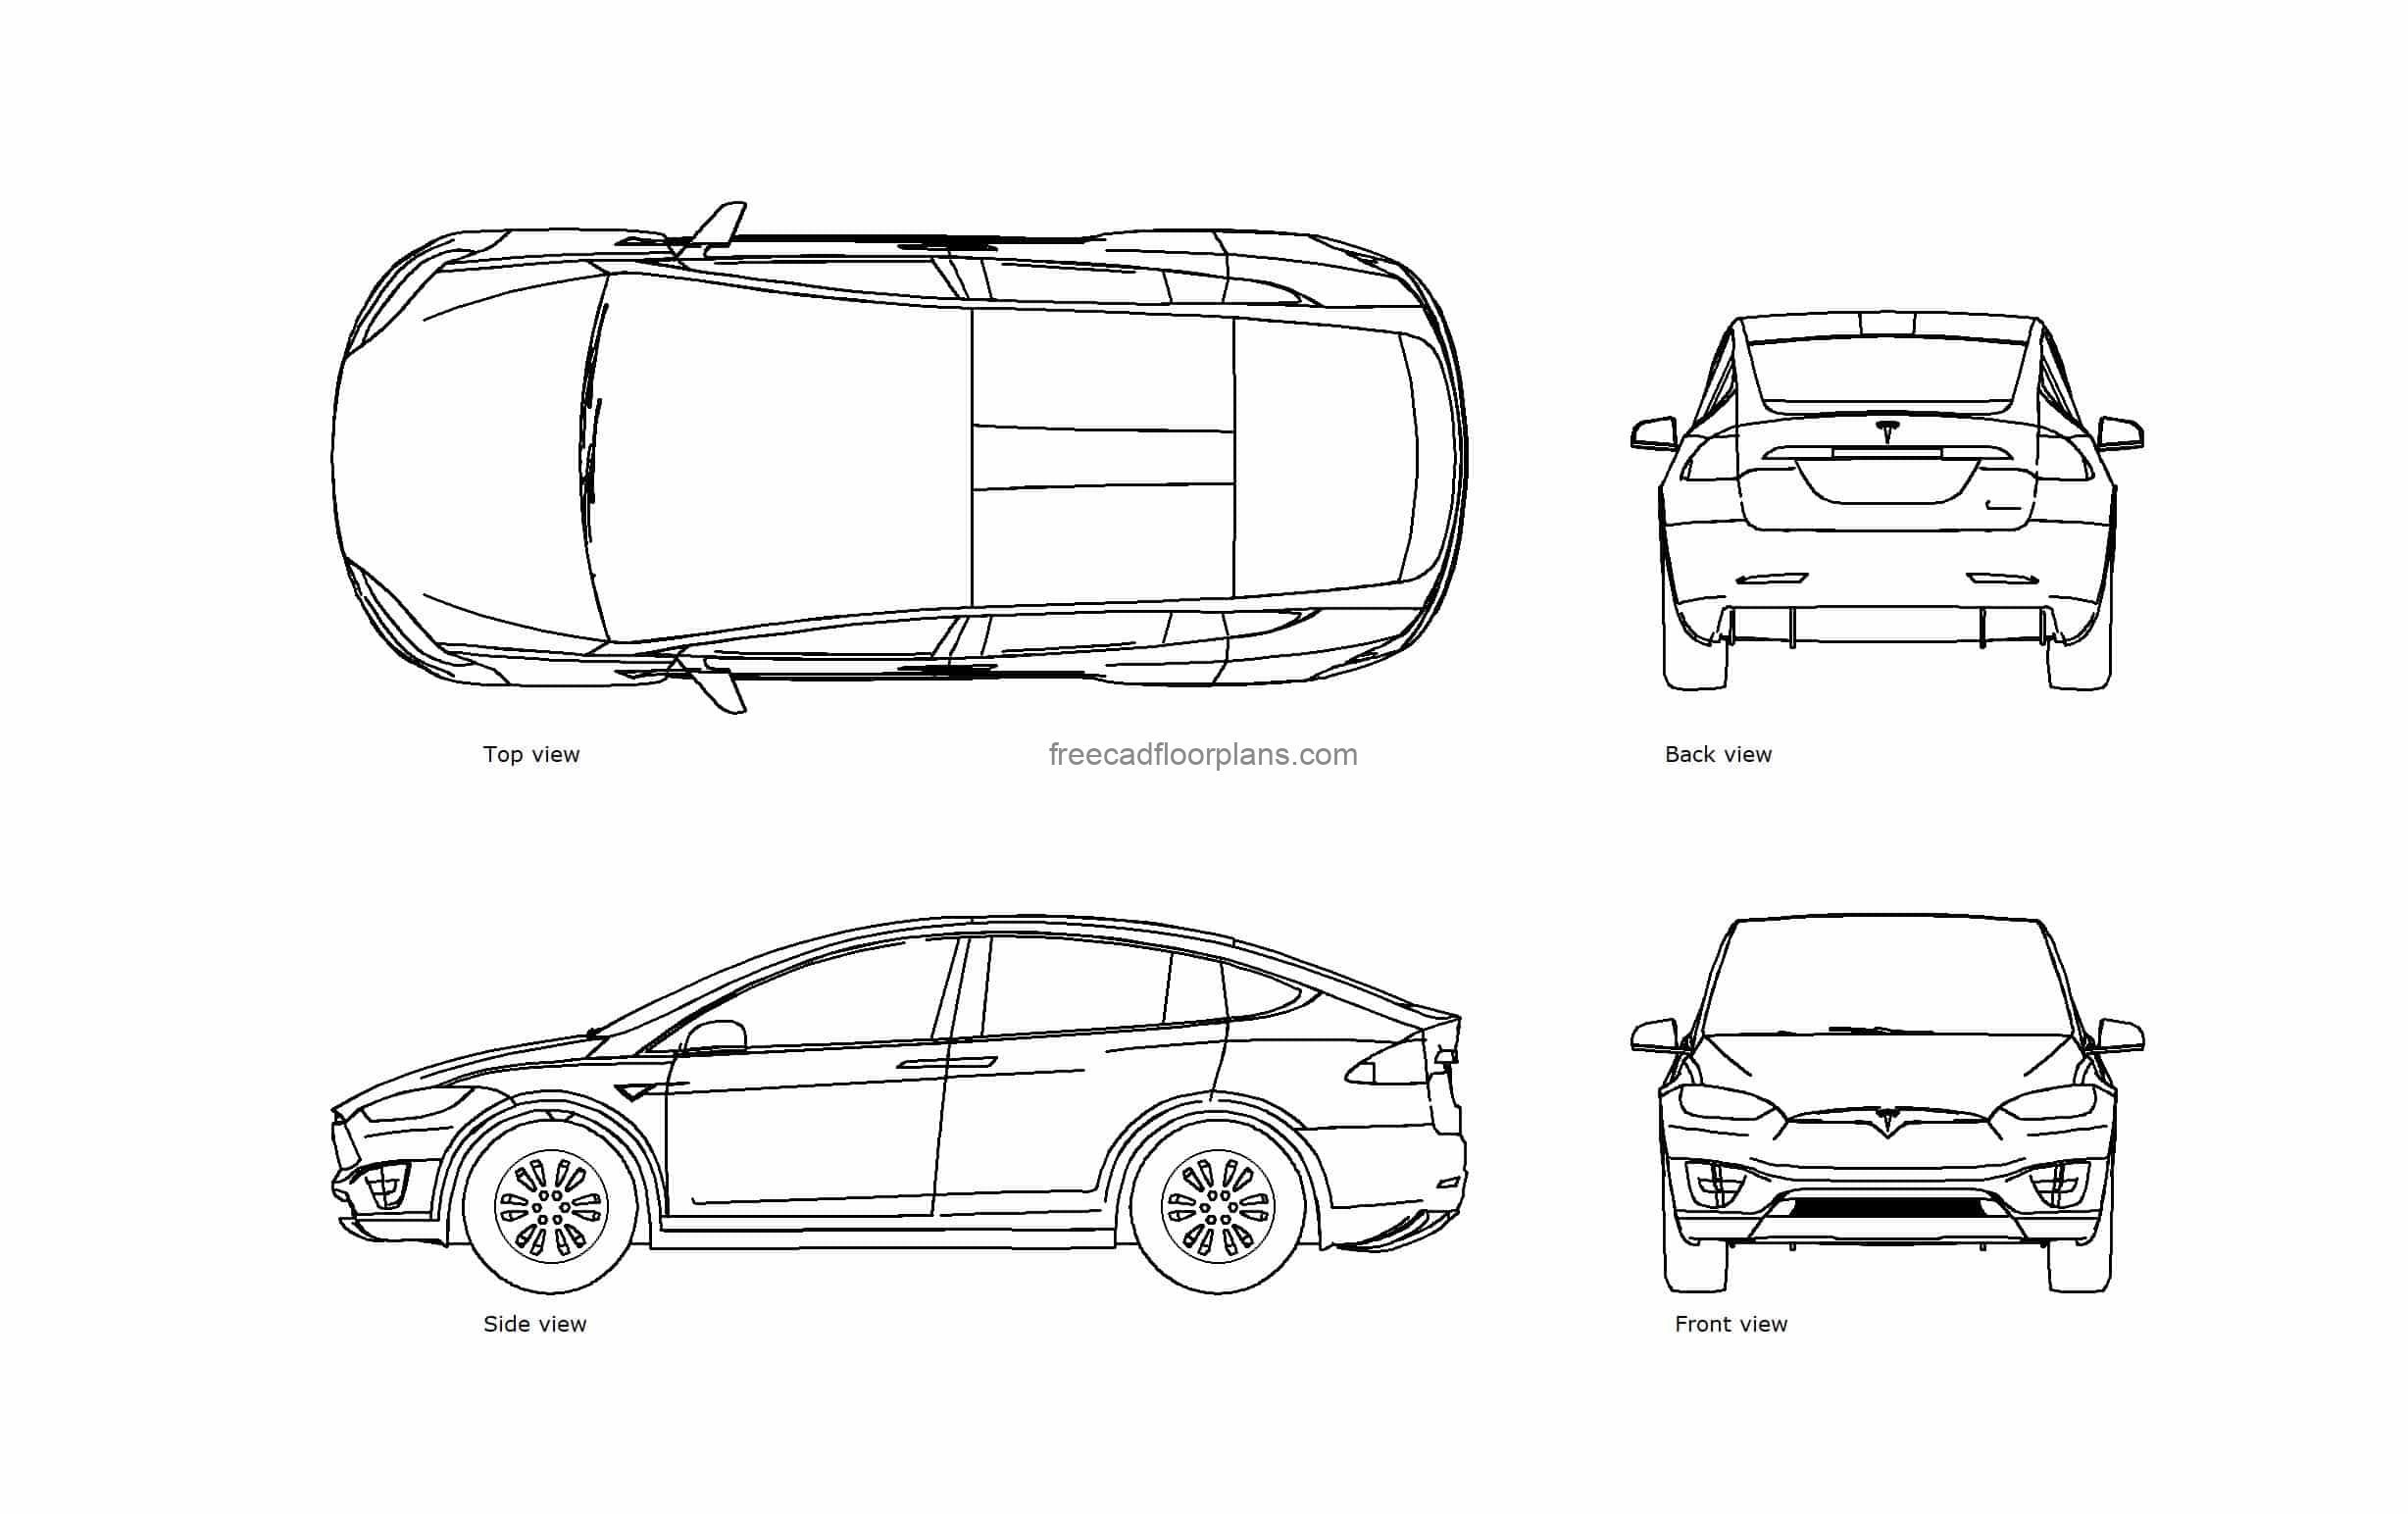 autocad drawing of a tesla model x car, 2d views dwg file for free download